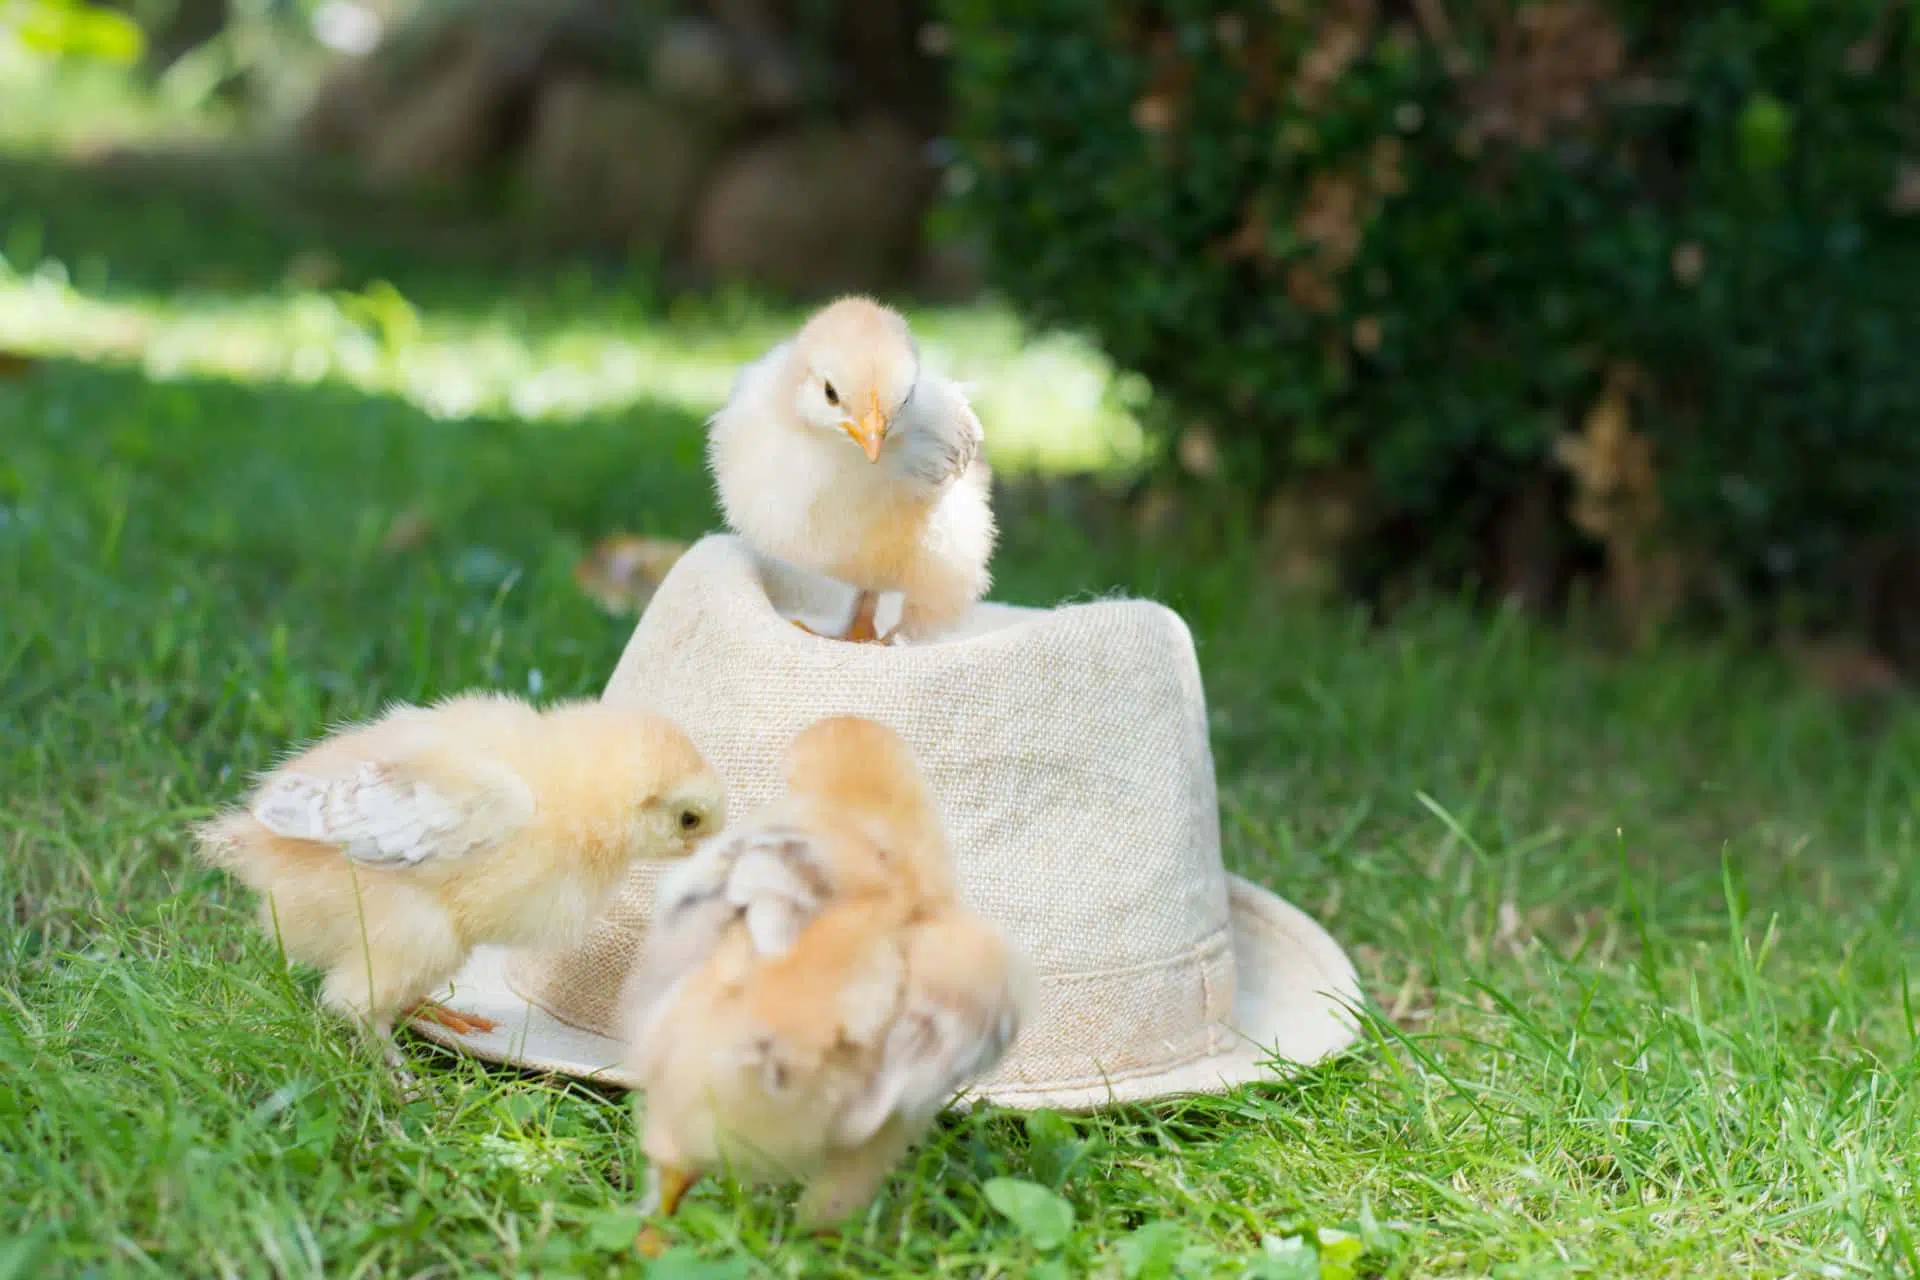 Image of three baby roaming chickens in a backyard standing on and around a straw hat.